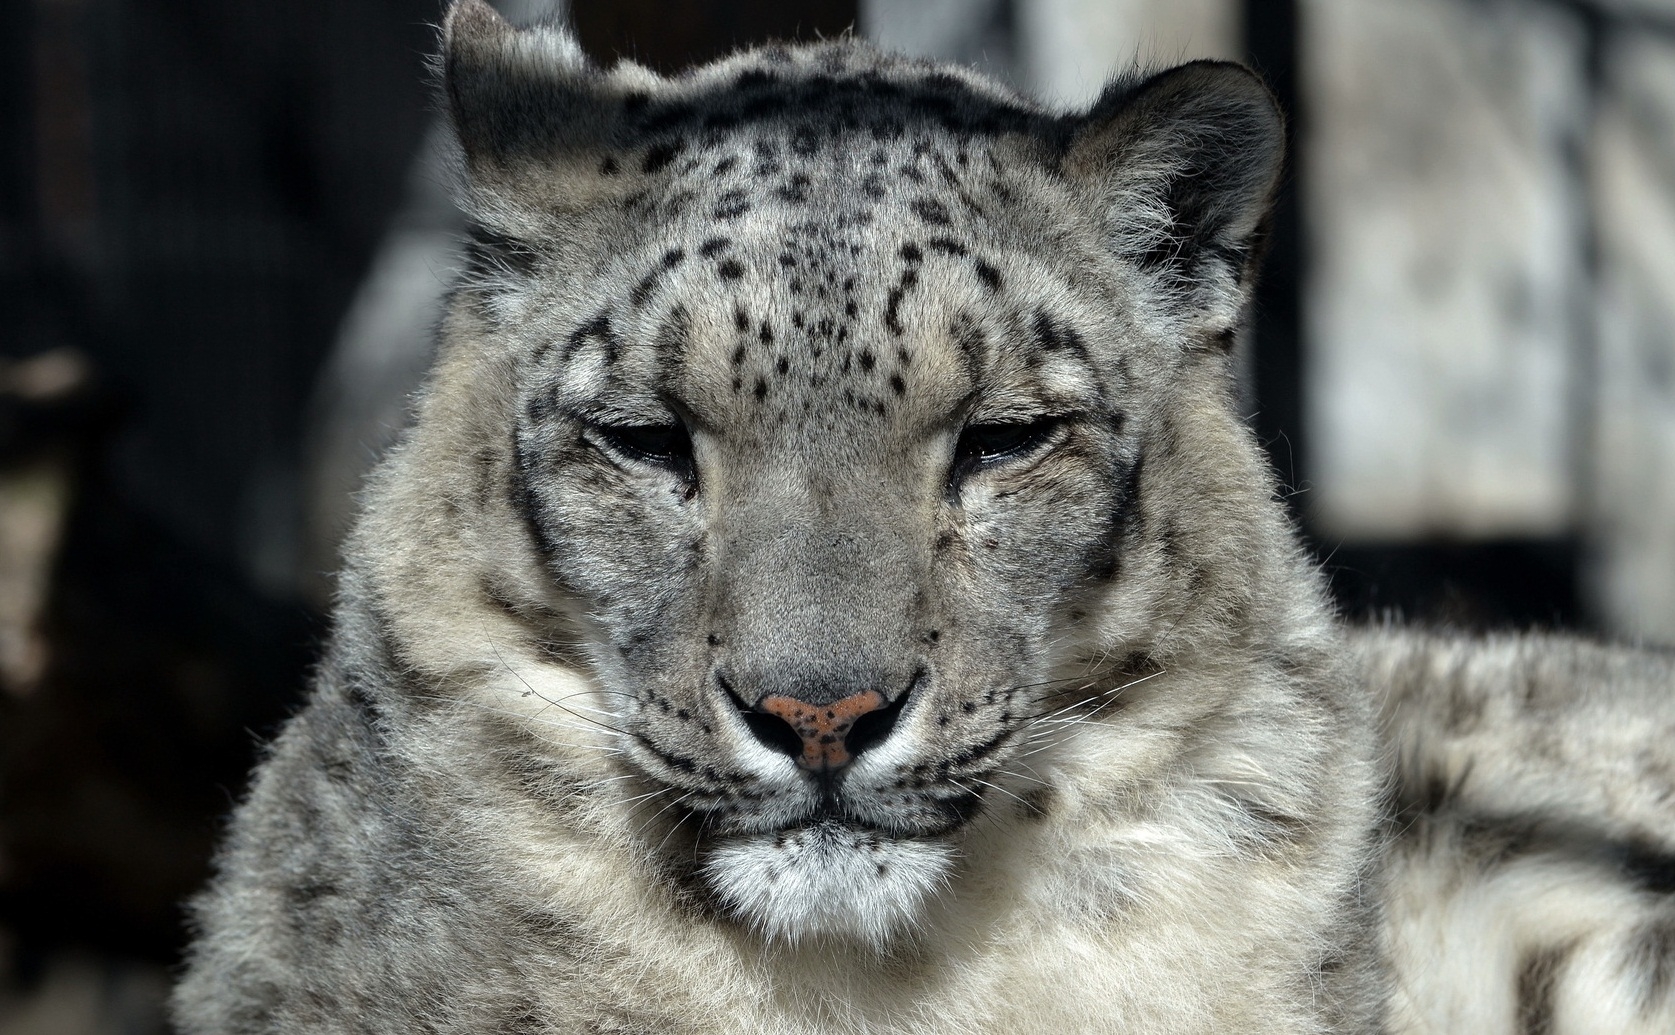 91906 download wallpaper snow leopard, animals, muzzle, predator, big cat, sleep, dream screensavers and pictures for free